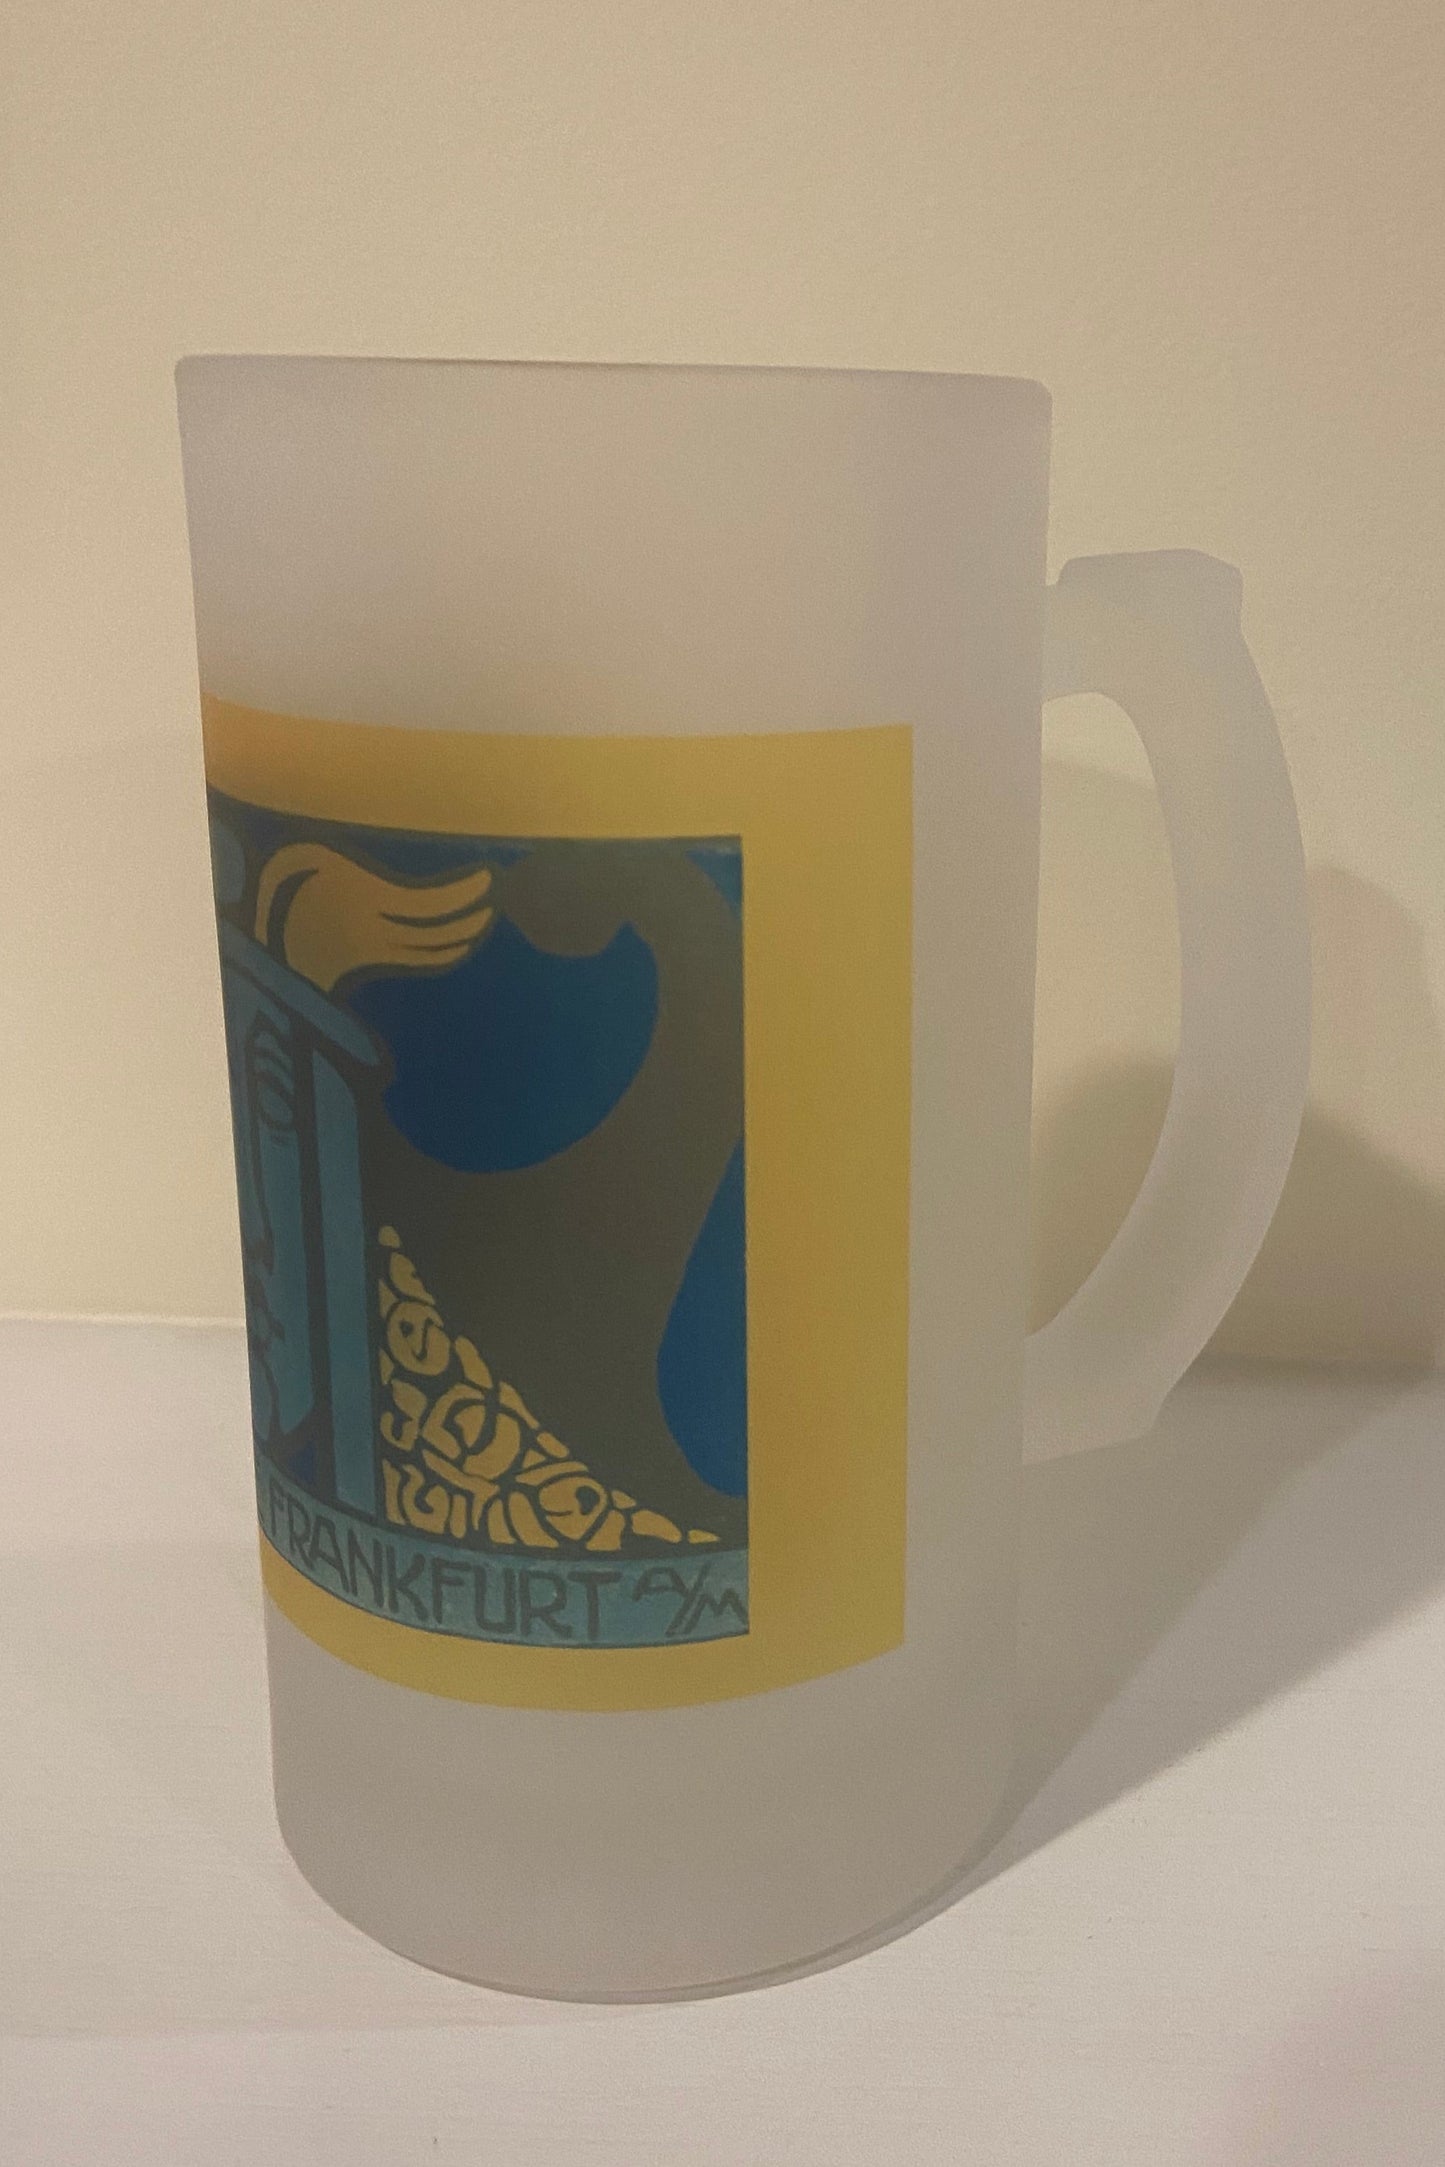 Winged Victory Frosted Glass Beer Mug Created From A Century-Old German Art Exhibit Postcard